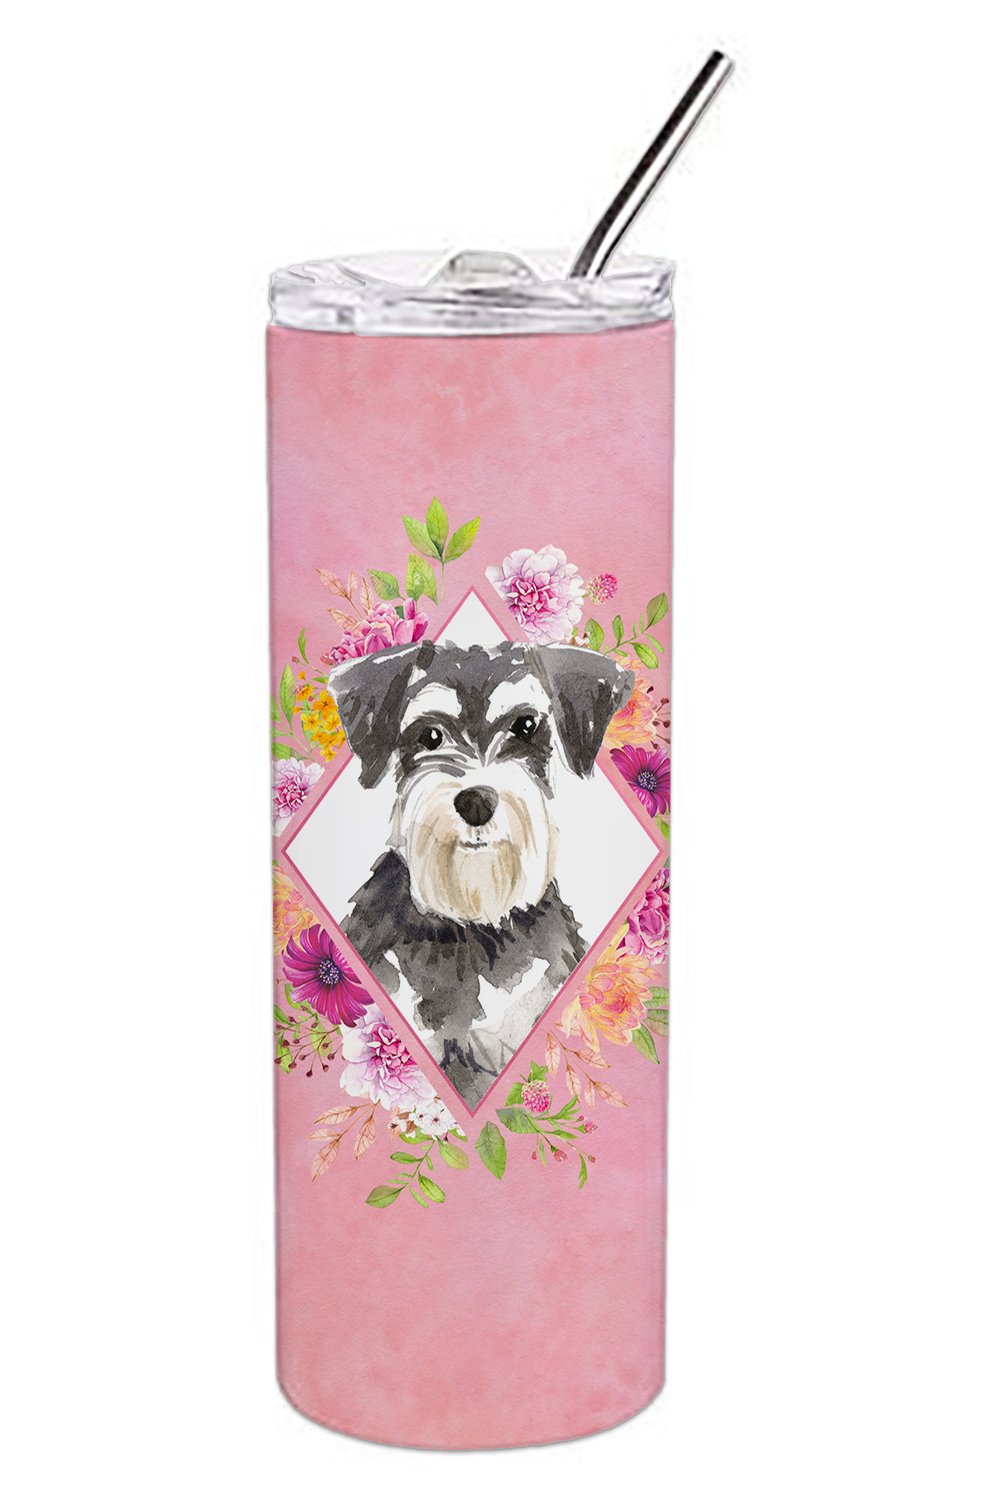 Schnauzer #2 Pink Flowers Double Walled Stainless Steel 20 oz Skinny Tumbler CK4222TBL20 by Caroline's Treasures